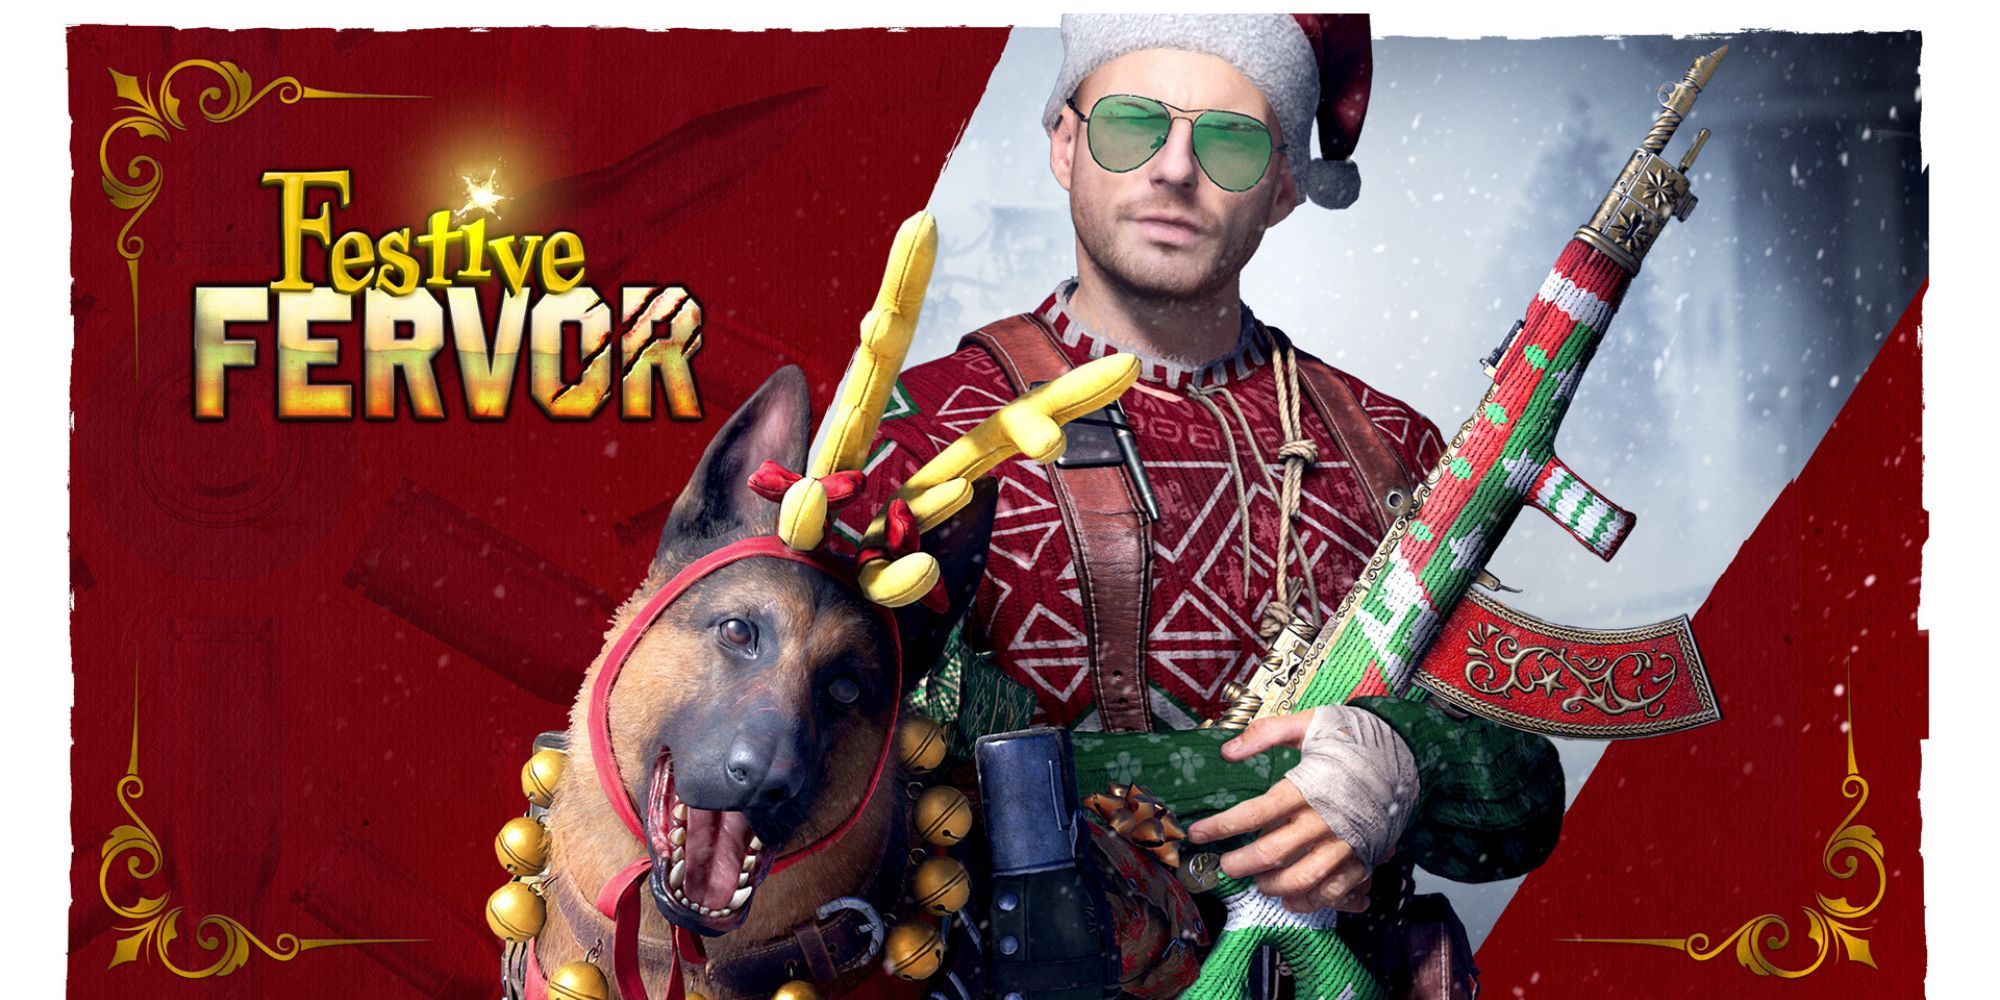 Call Of Duty Warzone - Festive Fervor Christmas Event - Soldier and Dog with Festive Cosmetics